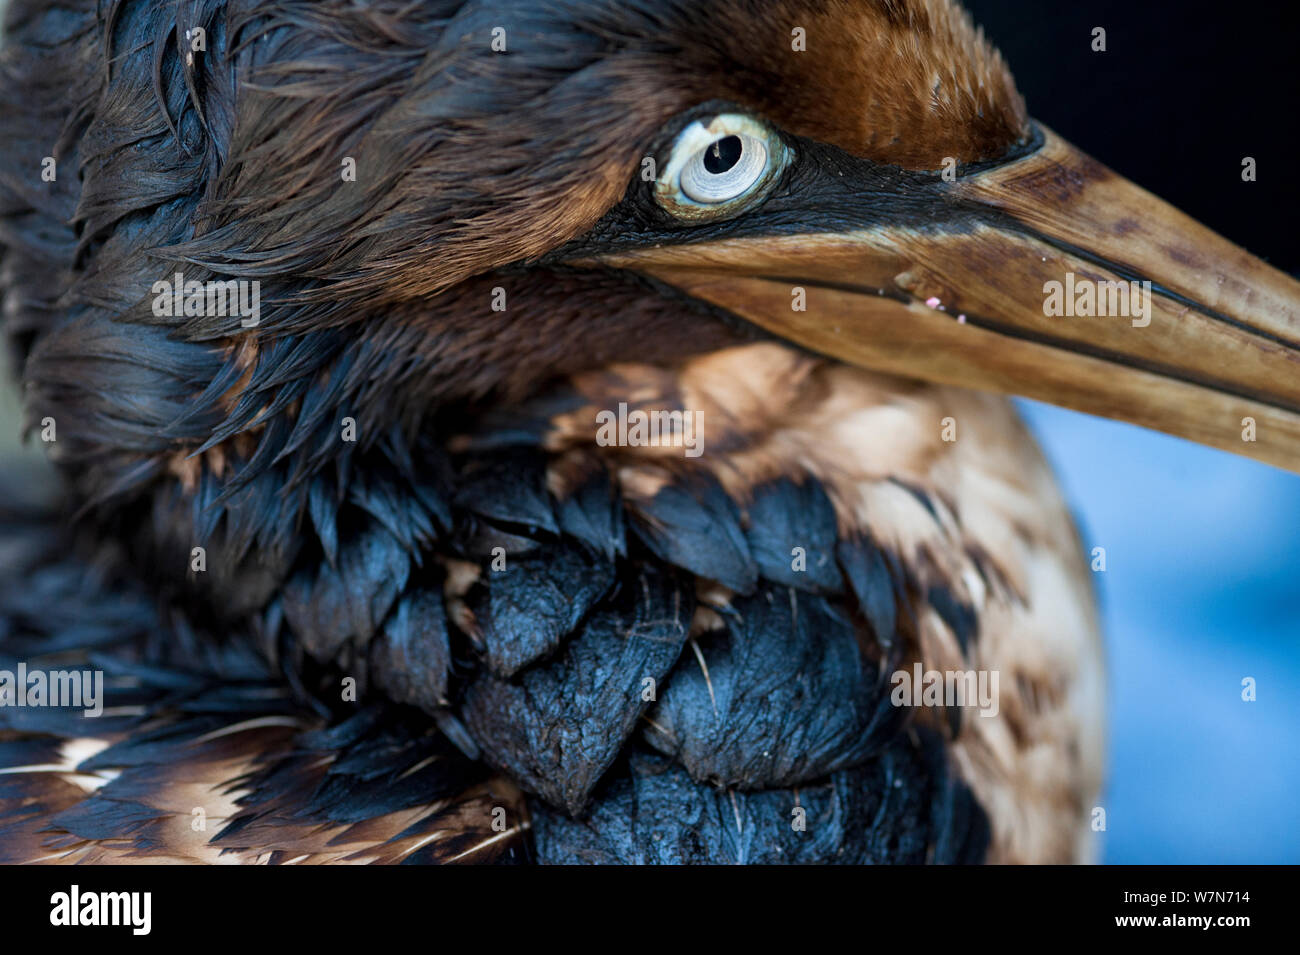 Cape gannet (Morus capensis) covered in oil, in rehabilitation at the Southern African Foundation for the Conservation of Coastal Birds (SANCCOB) Cape Town, South Africa Stock Photo